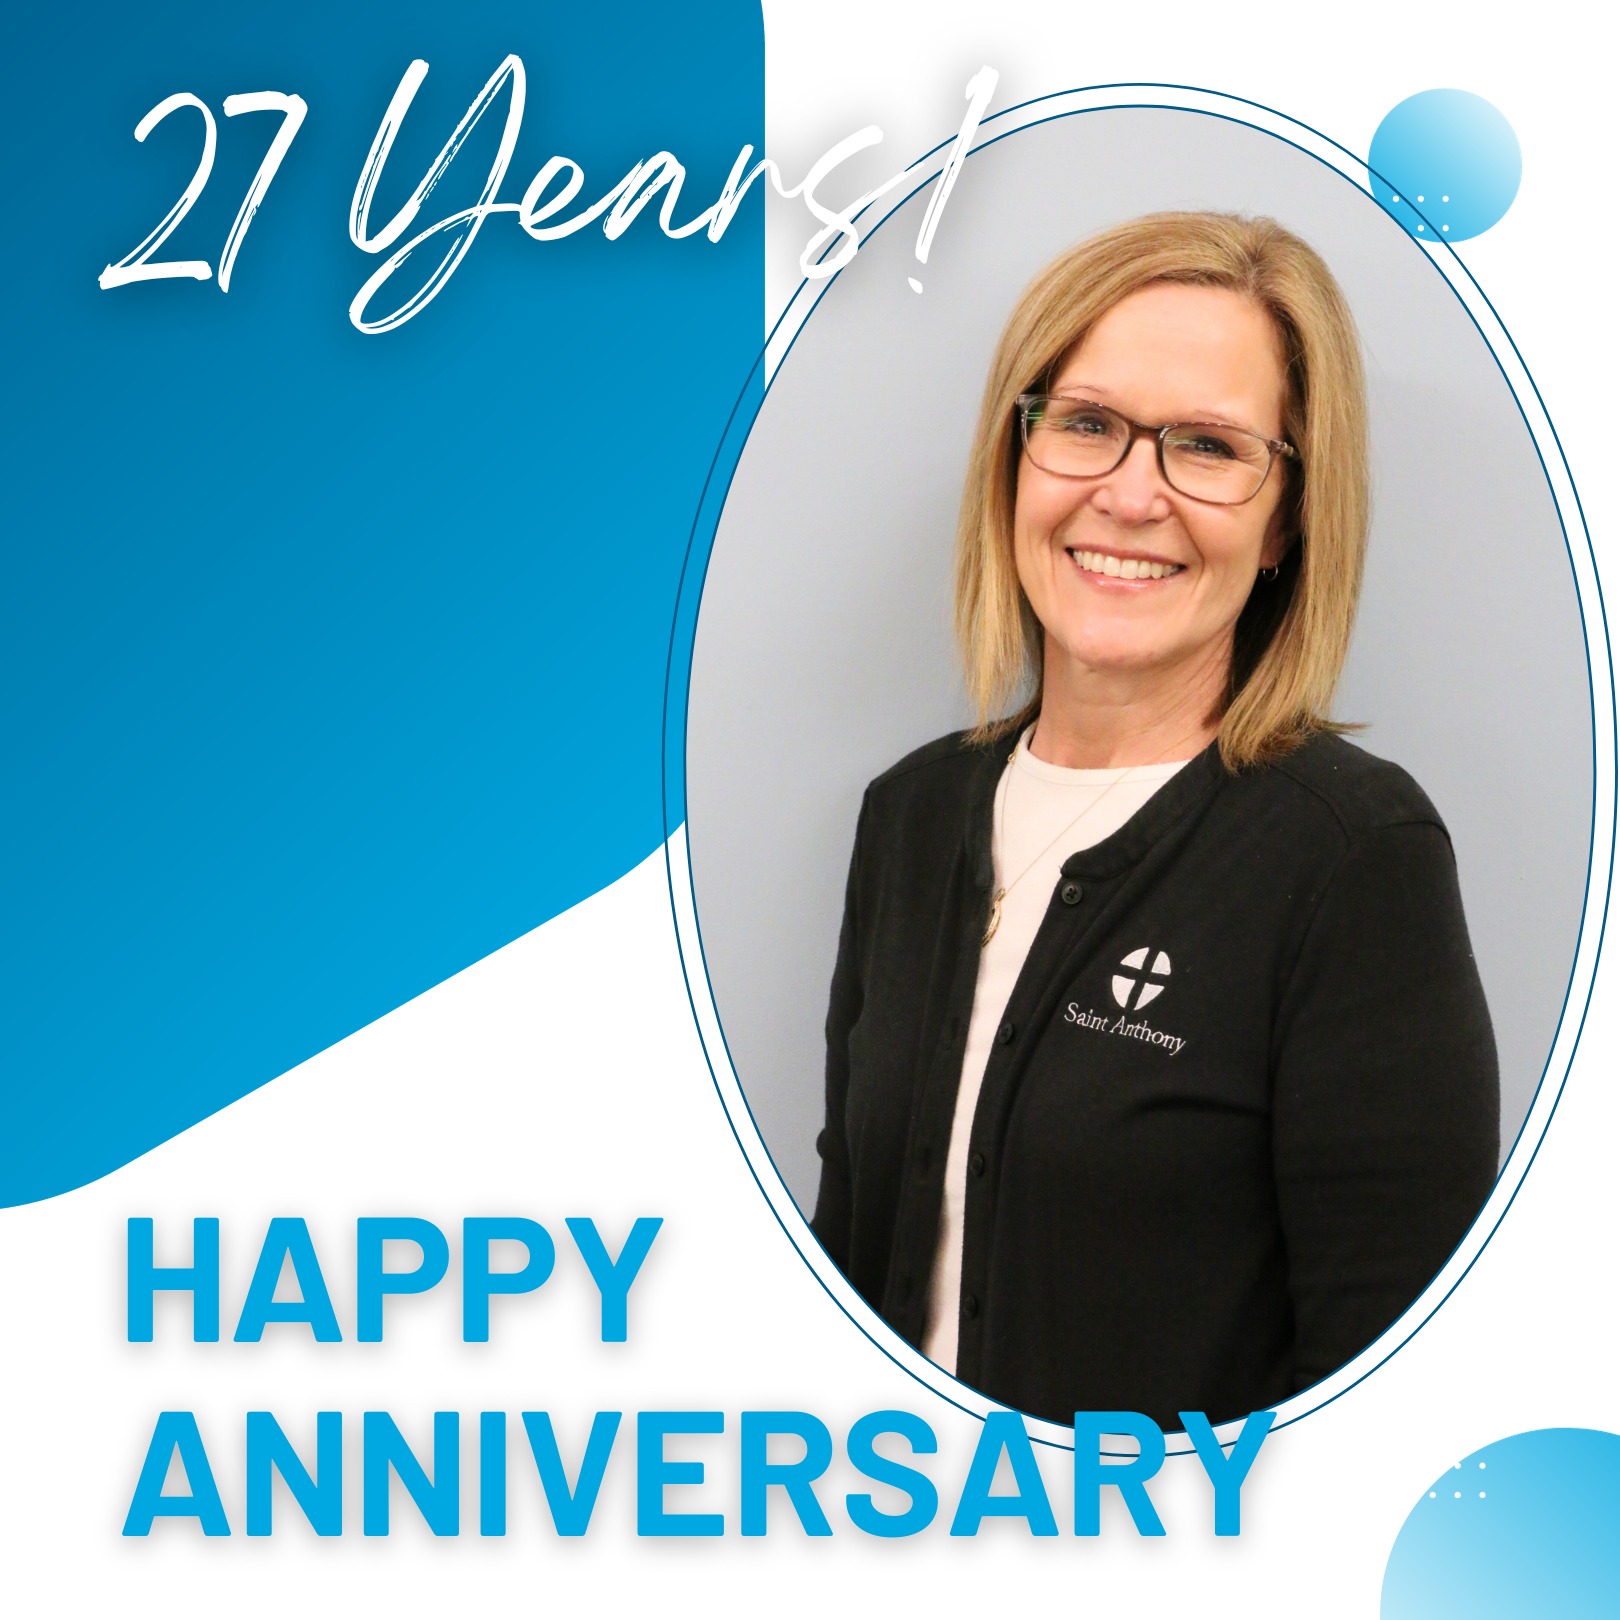 Happy 27th Anniversary to Tracie Shoults!